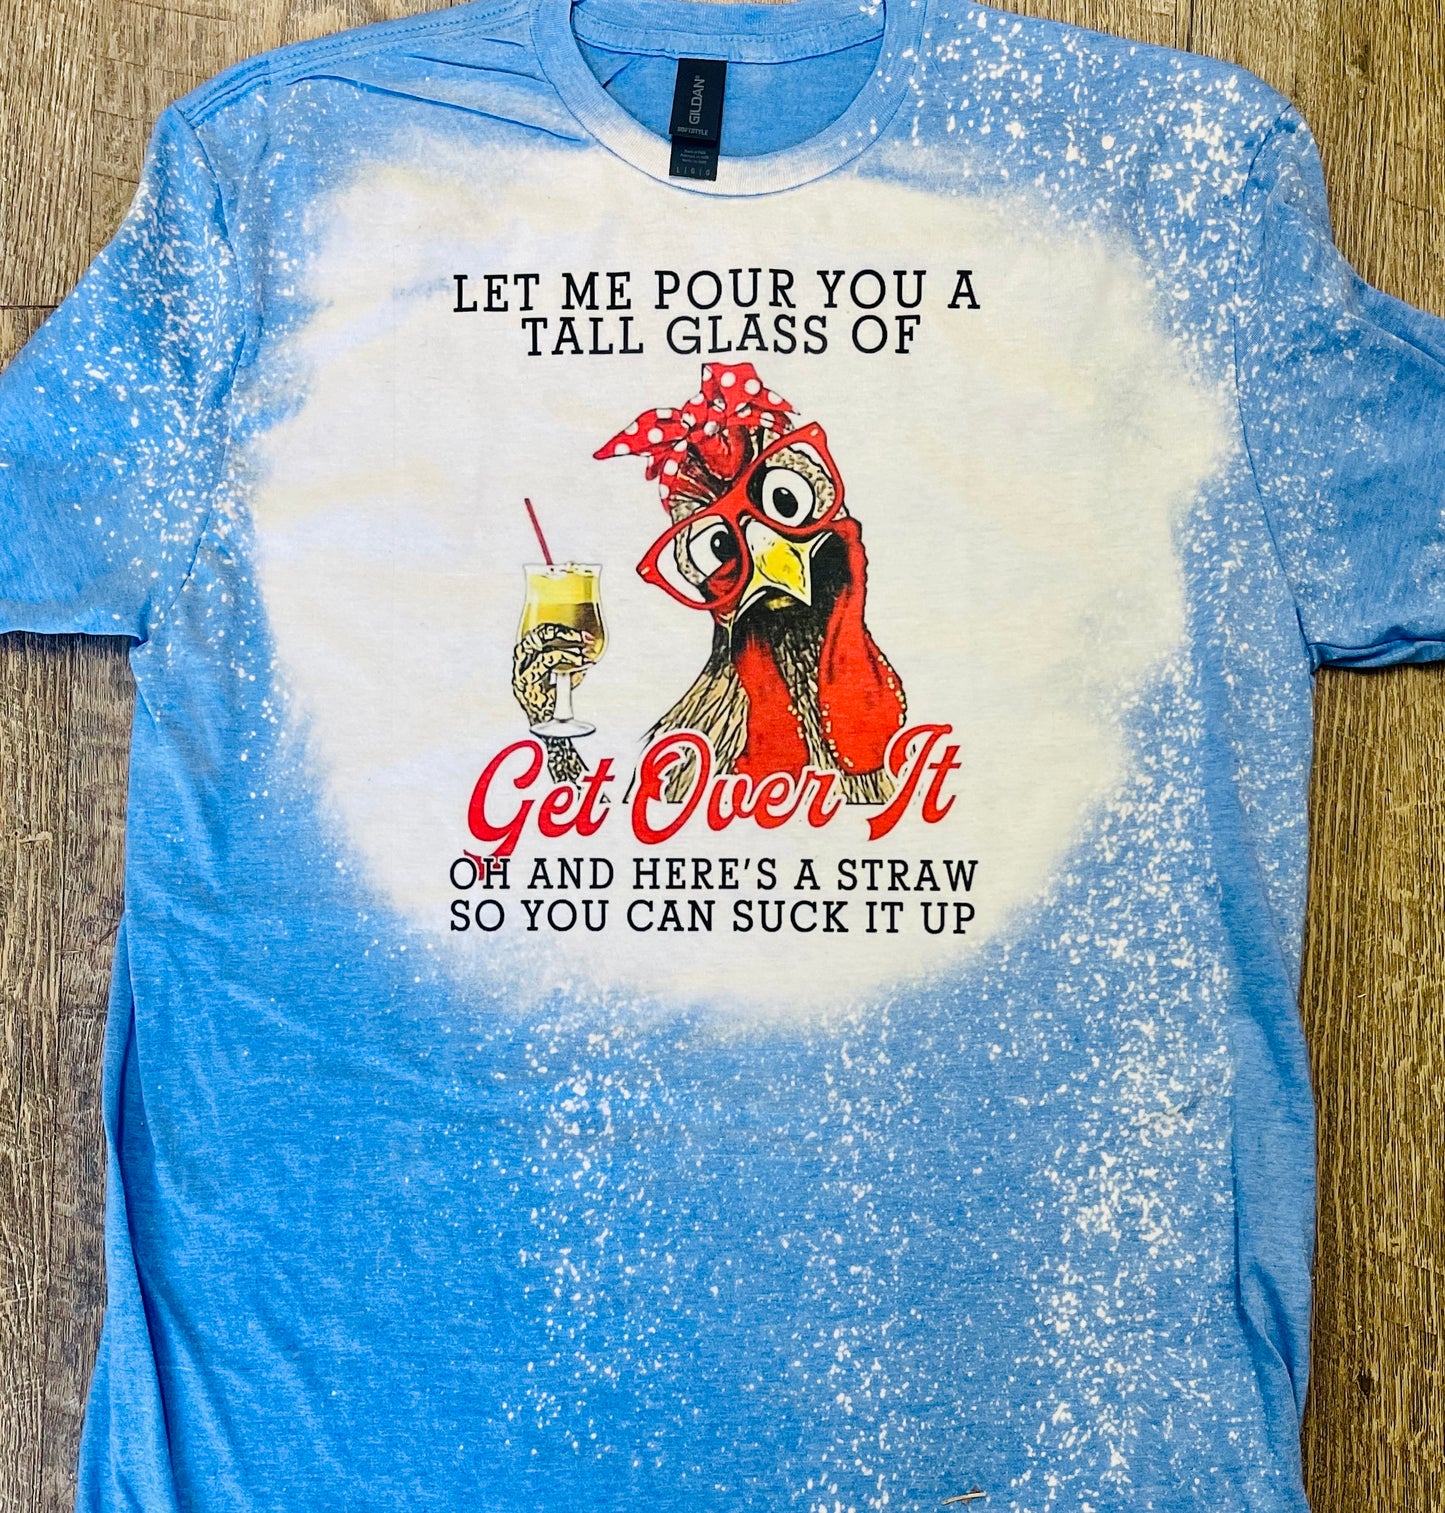 Product details  Custom sublimated tee that reads “Let me pour you a tall glass of GET OVER IT, oh and here's a straw so you can suck it up" Pressed on a soft style Gildan shirt Short sleeve  Fits true to size Contact us about a custom color shirt.   *Colors may vary slightly due to monitor resolution and lighting* Southern Bliss Boutique 